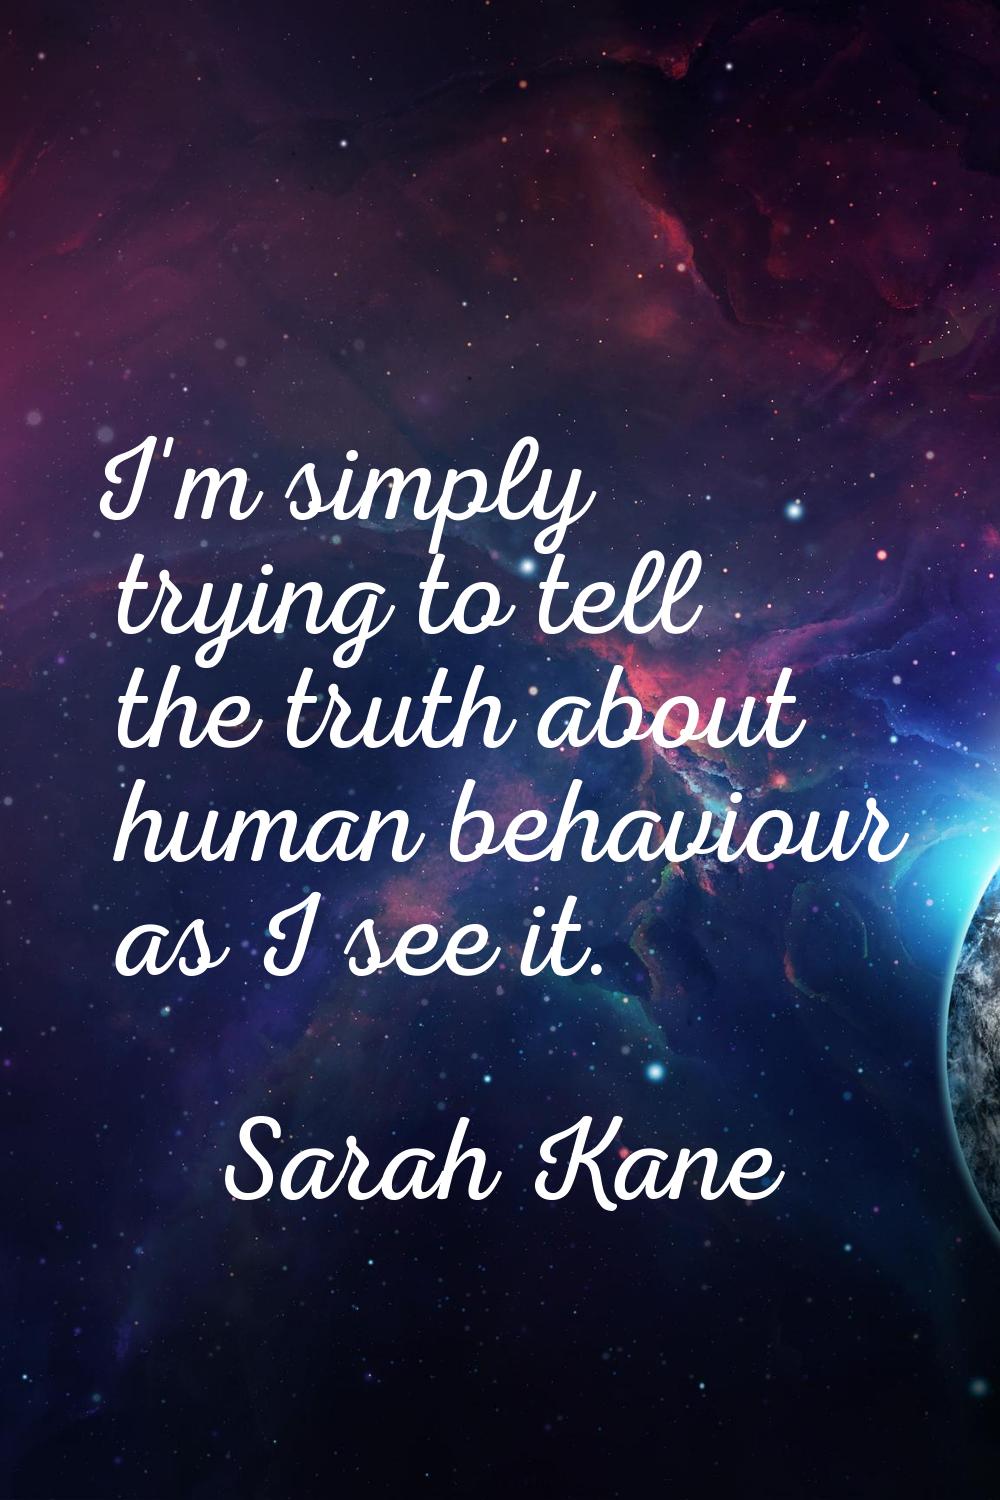 I'm simply trying to tell the truth about human behaviour as I see it.